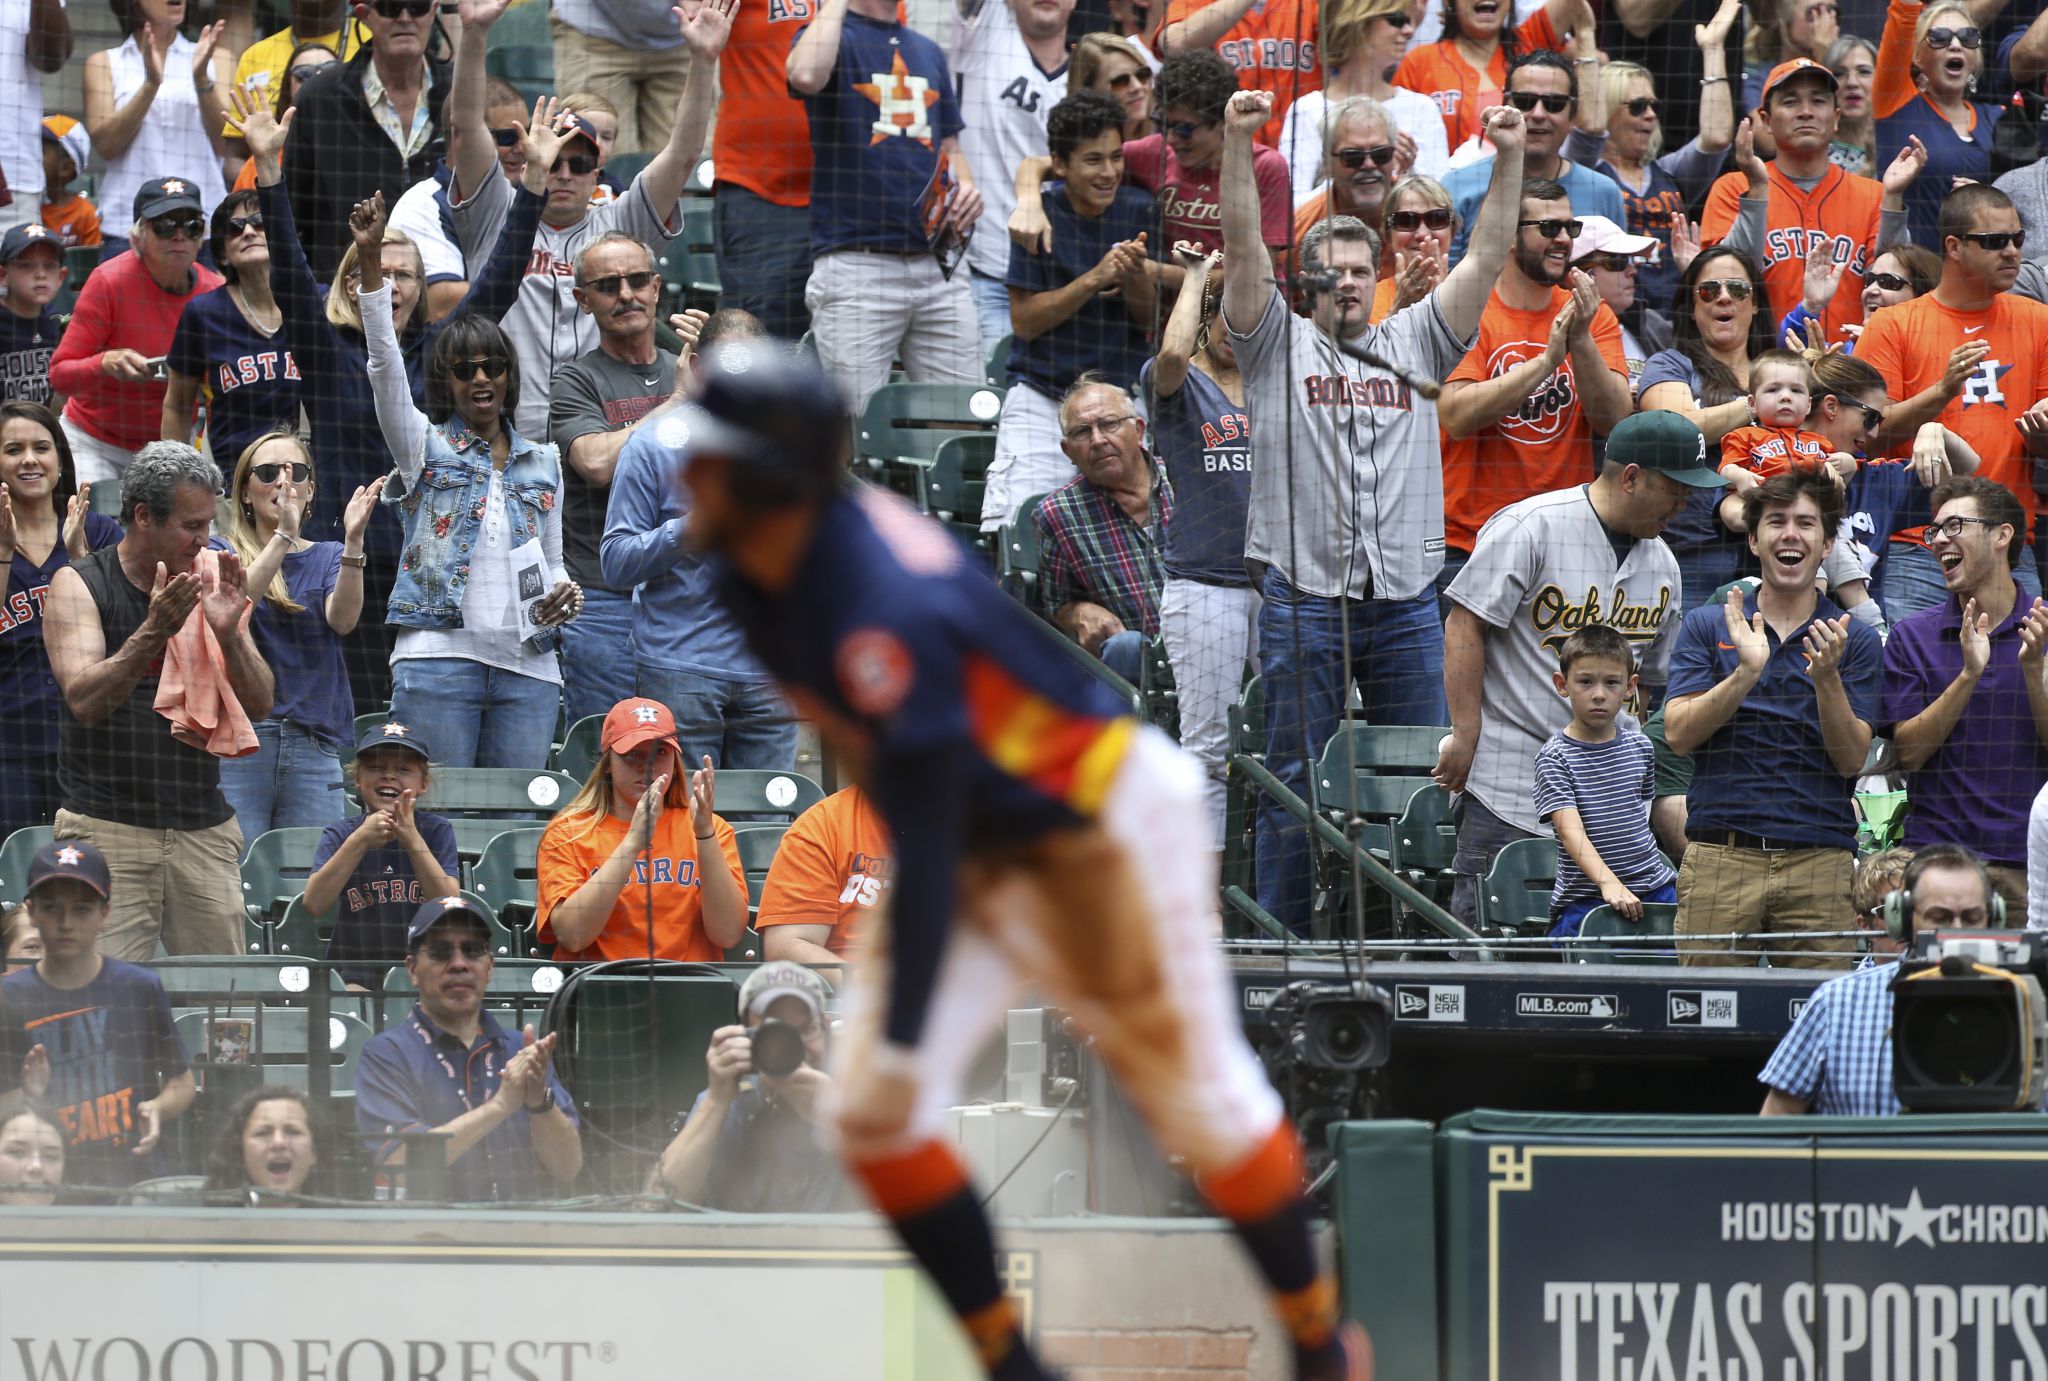 Is Astros foul ball guy allowed on the bandwagon?